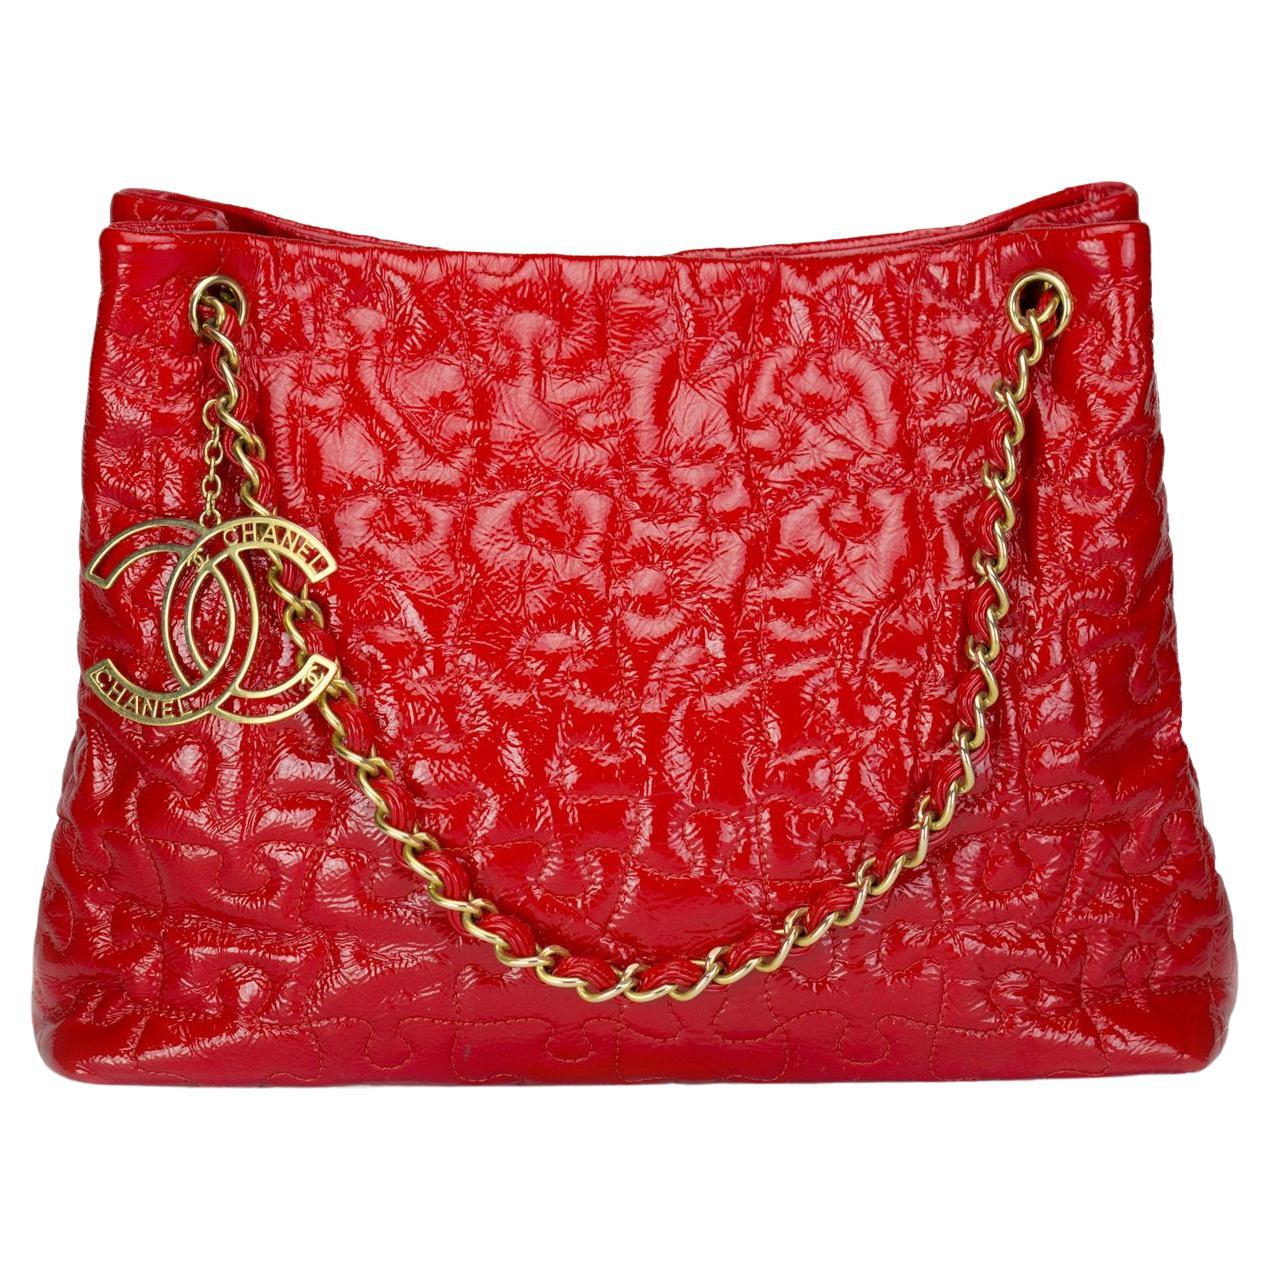 Chanel 2009 Rare Vintage Bright Red Quilted Puzzle Piece Patent Tote Satchel Bag